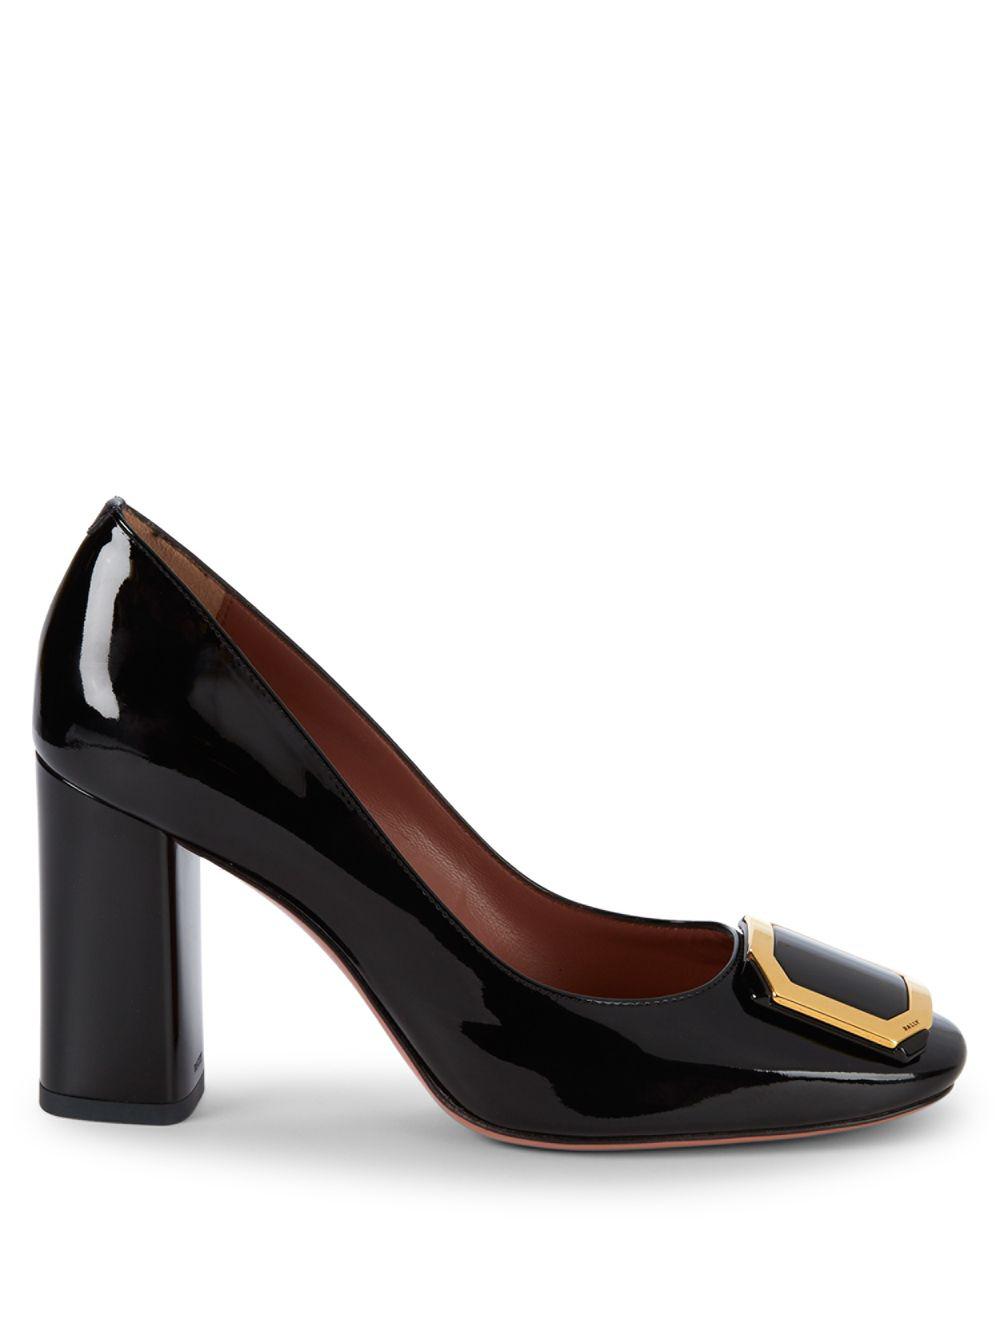 Bally Patent Leather Block Heel Pumps in Black - Lyst